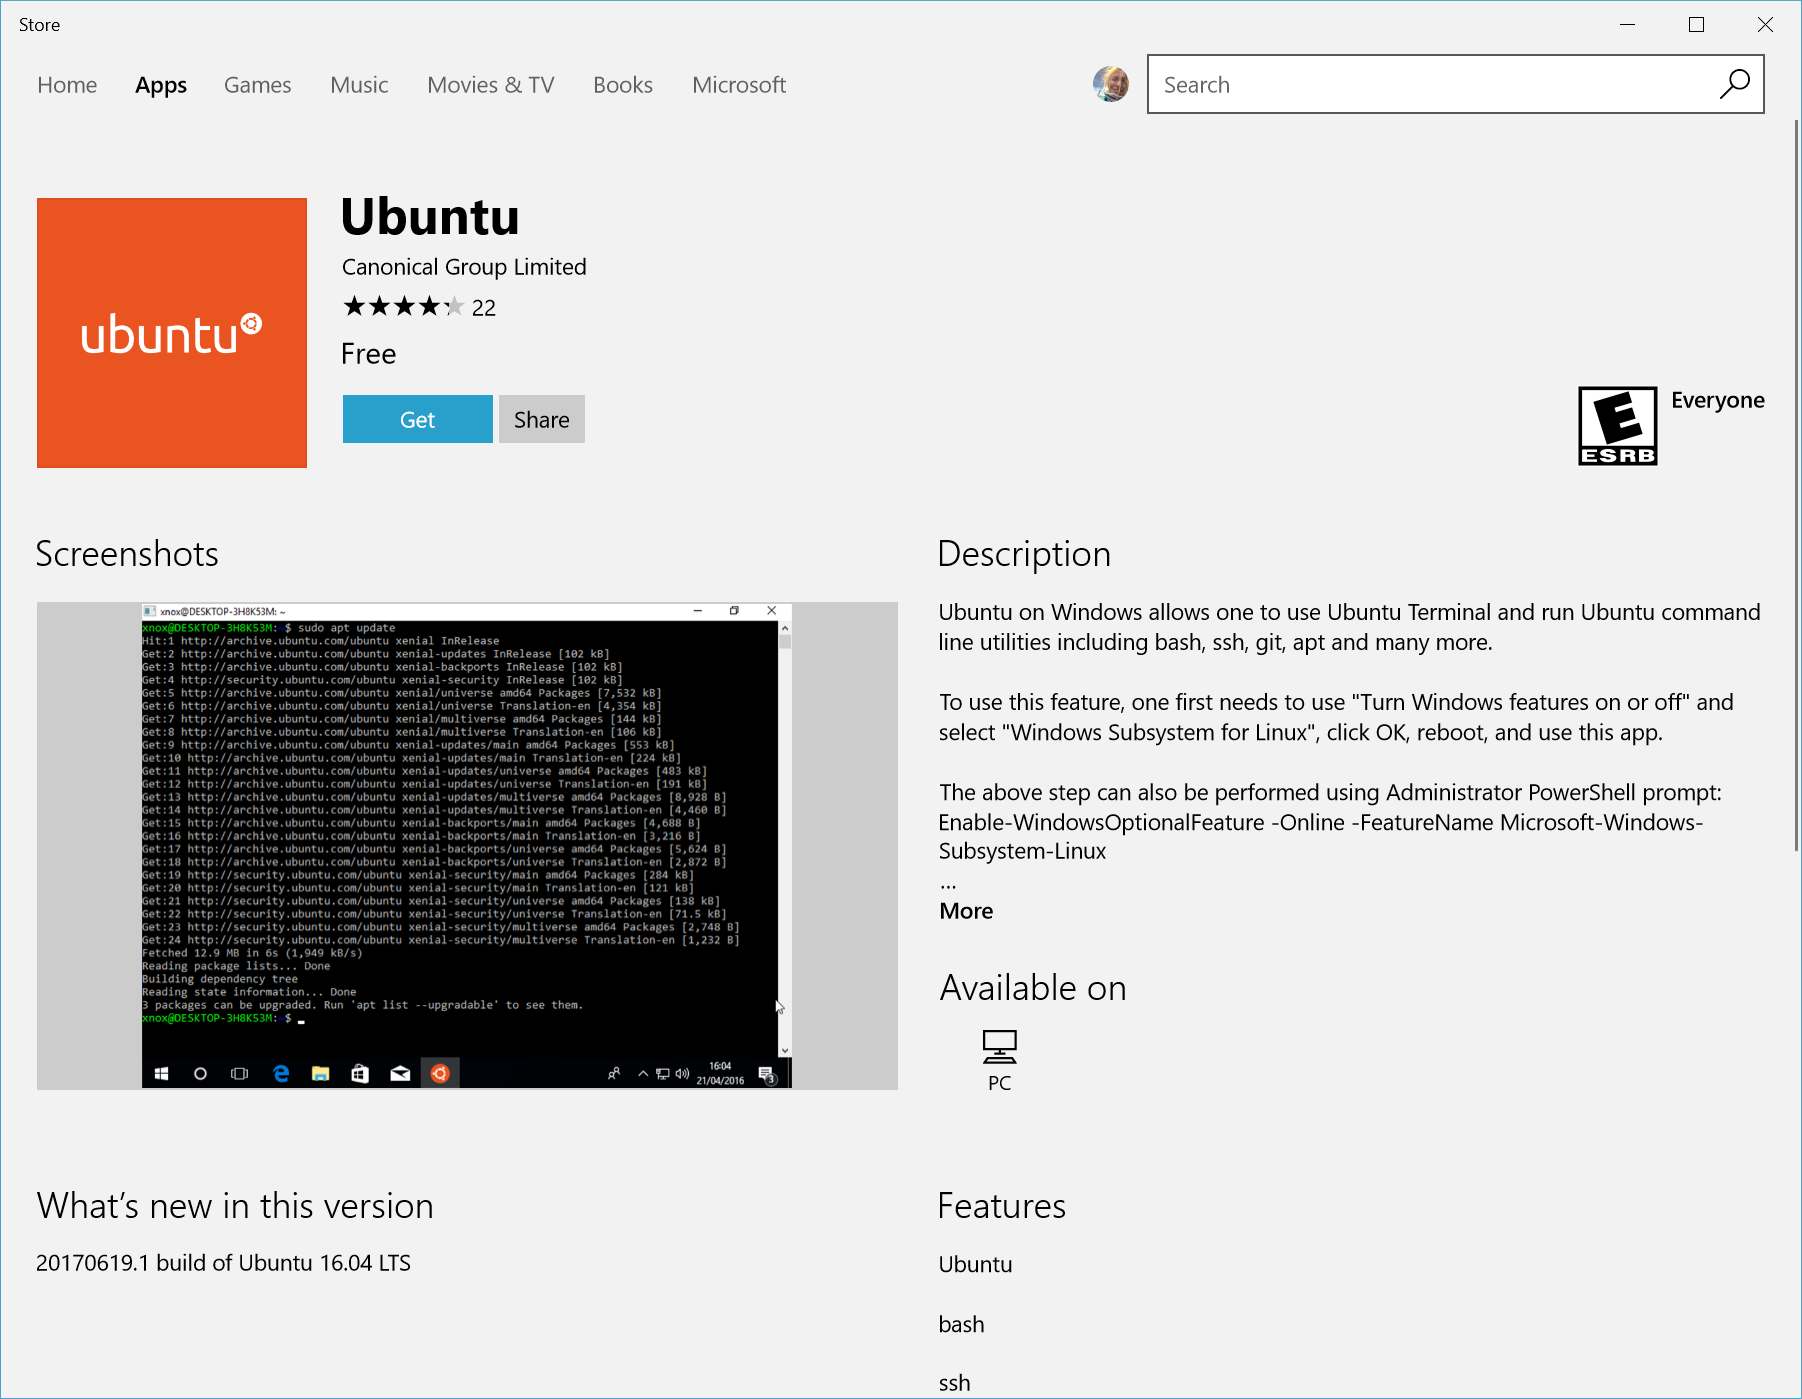 Linux distributions in the Microsoft store